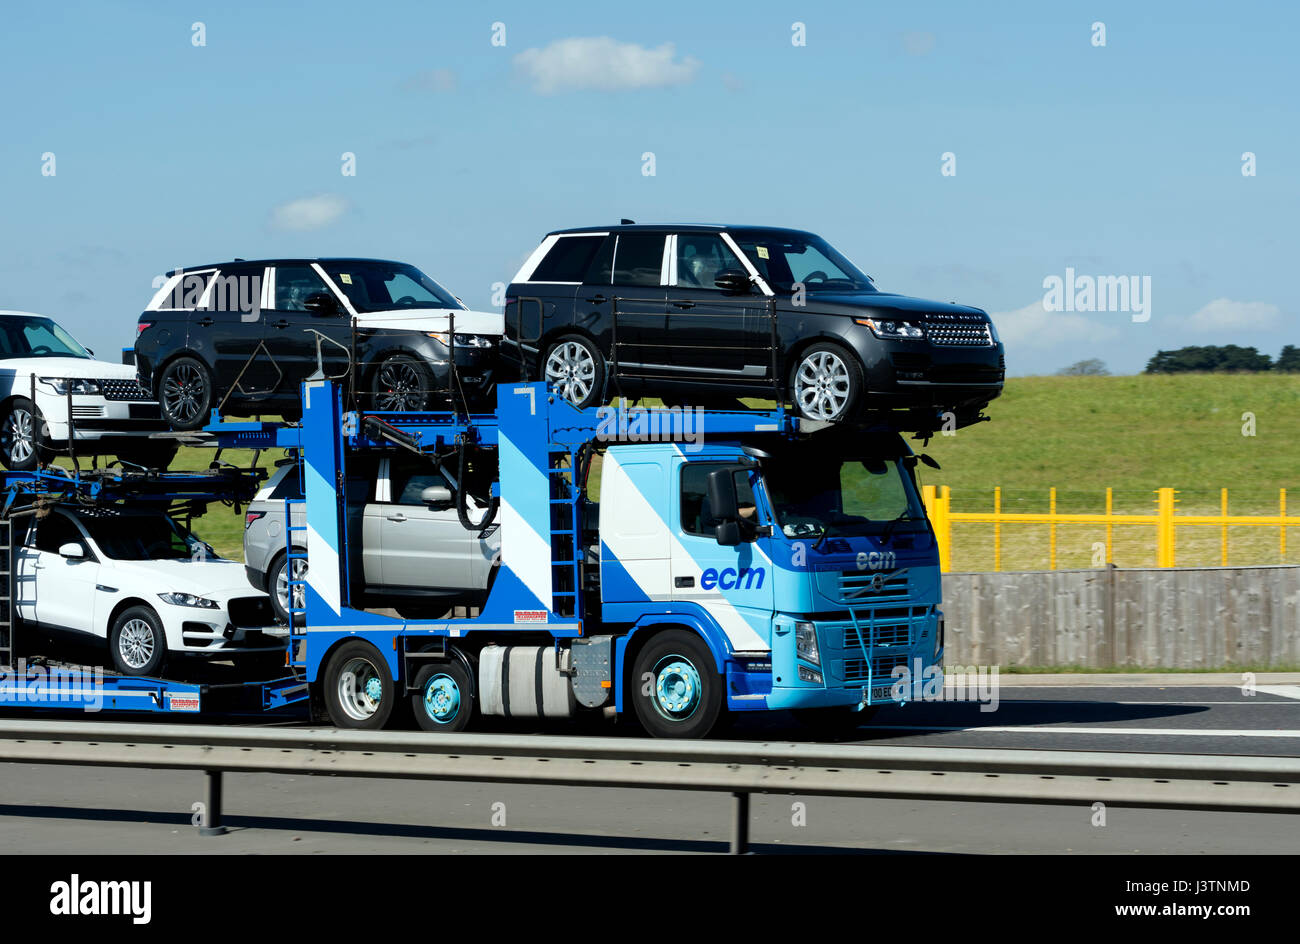 Car transporter carrying new Land Rover vehicles on the A45 road, West Midlands, UK Stock Photo